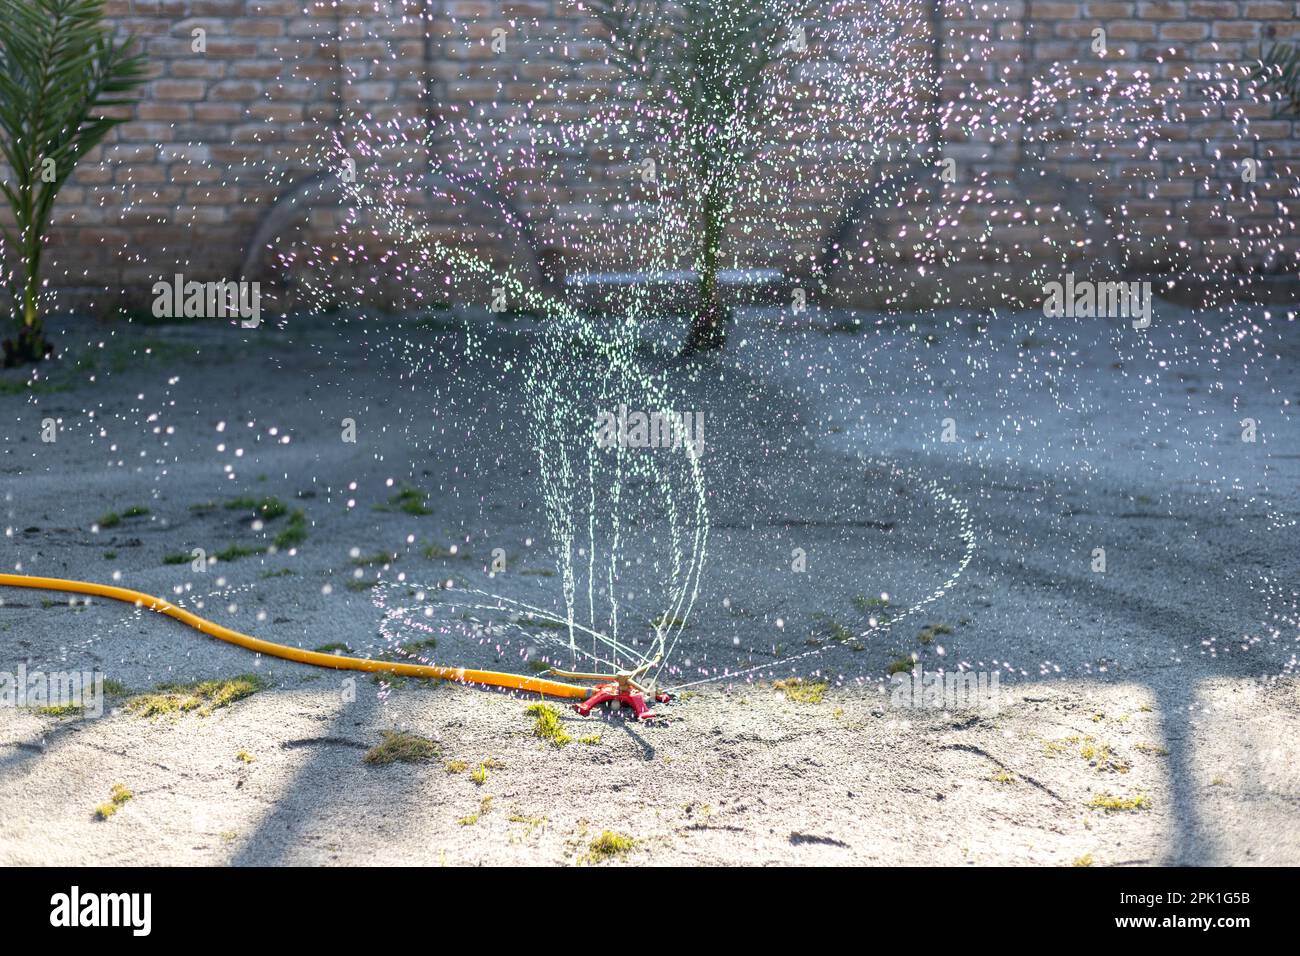 Garden lawn sprinkler in action watering the grass Stock Photo